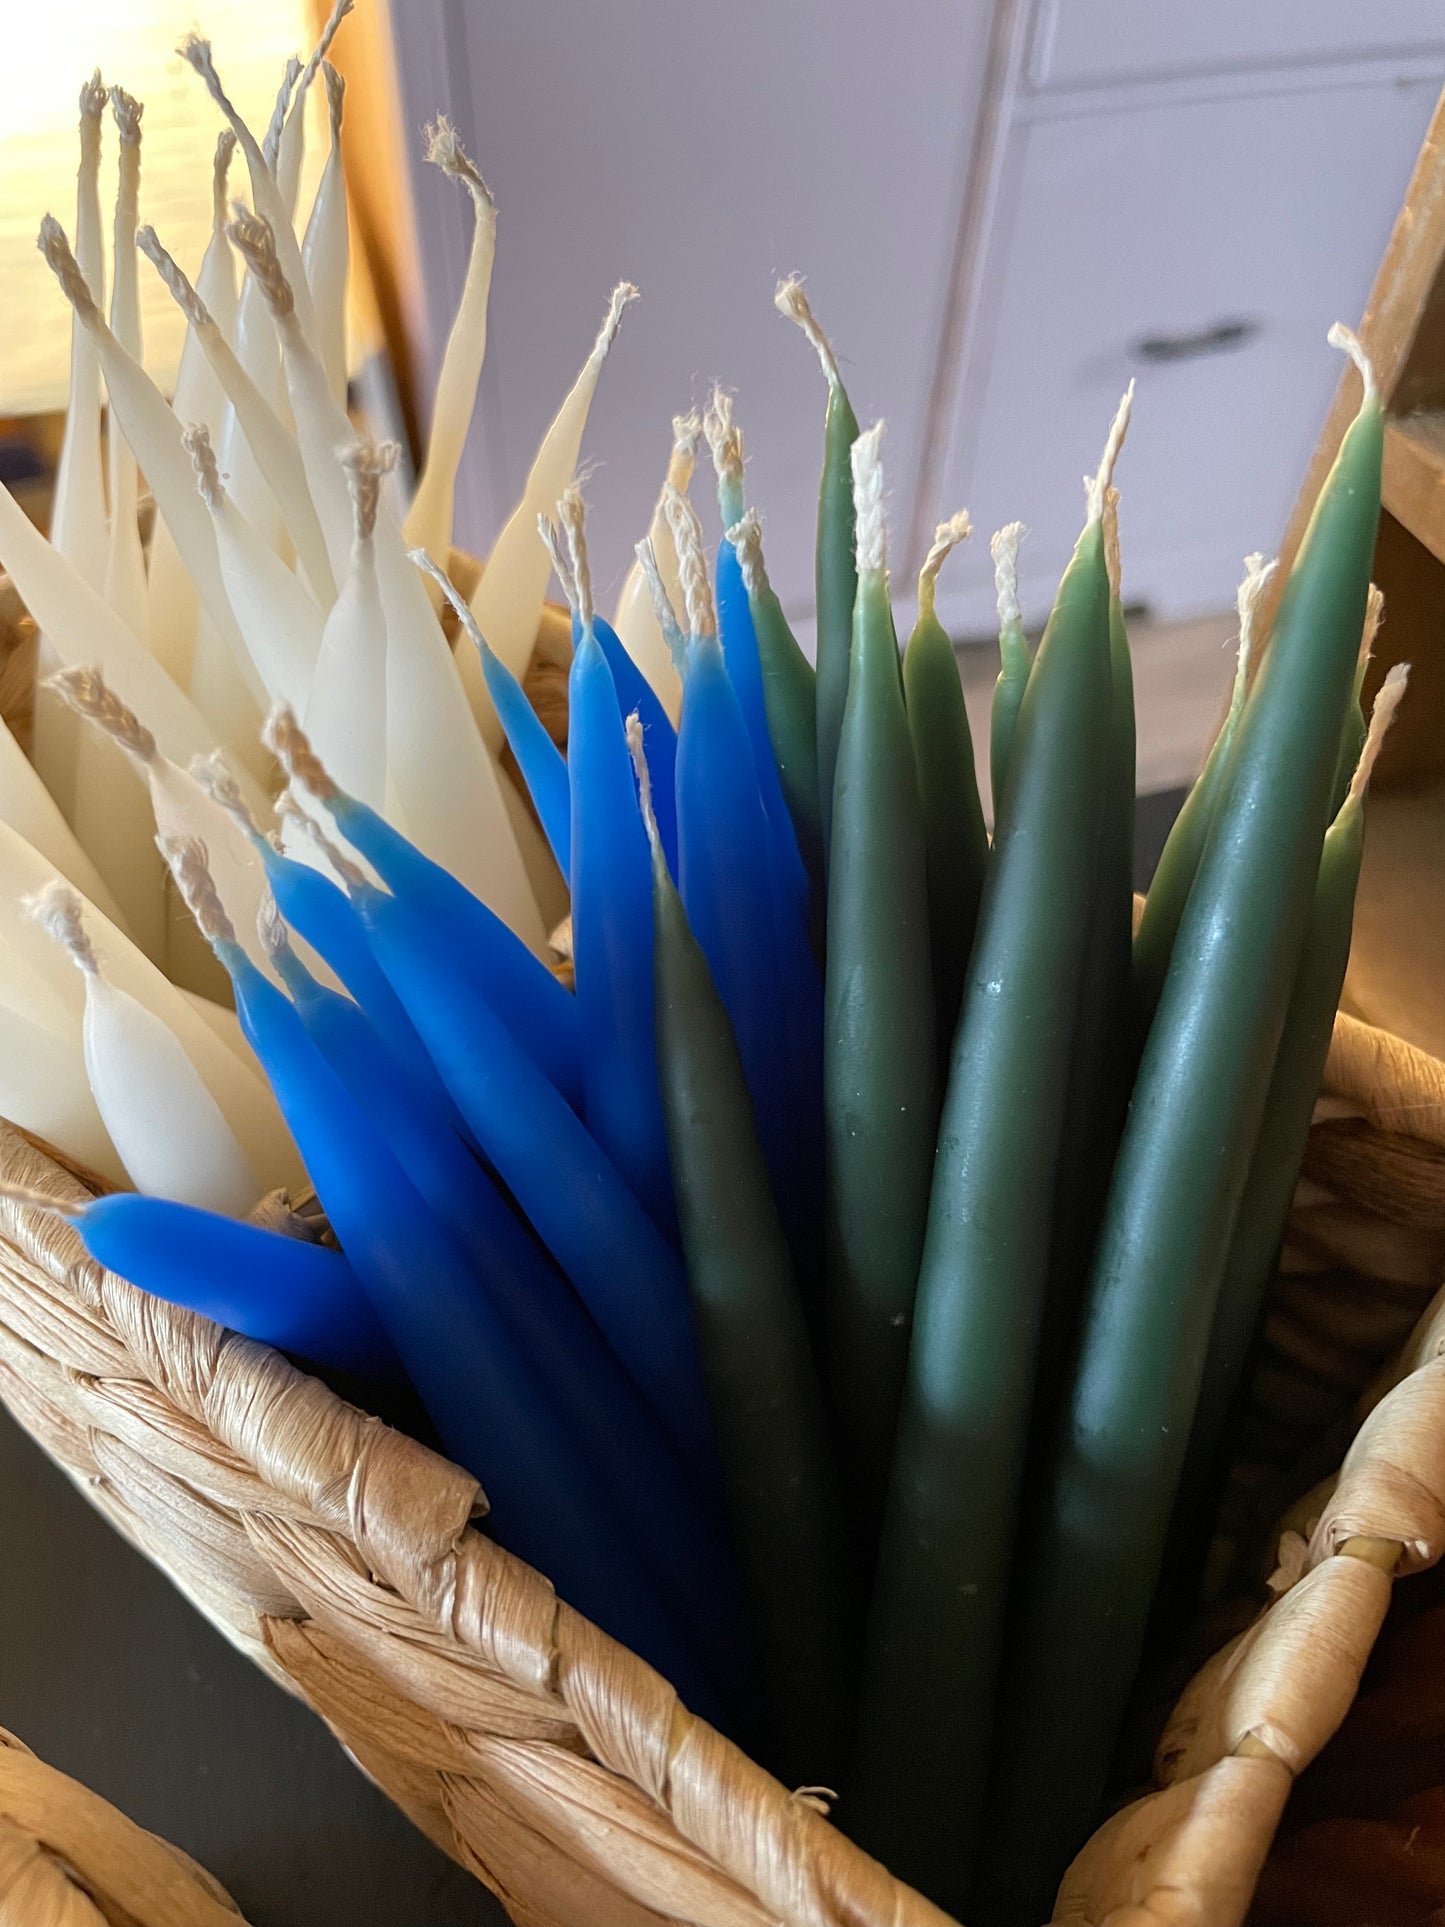 Swallow’s Nest Hand Dipped Beeswax Spell Candles